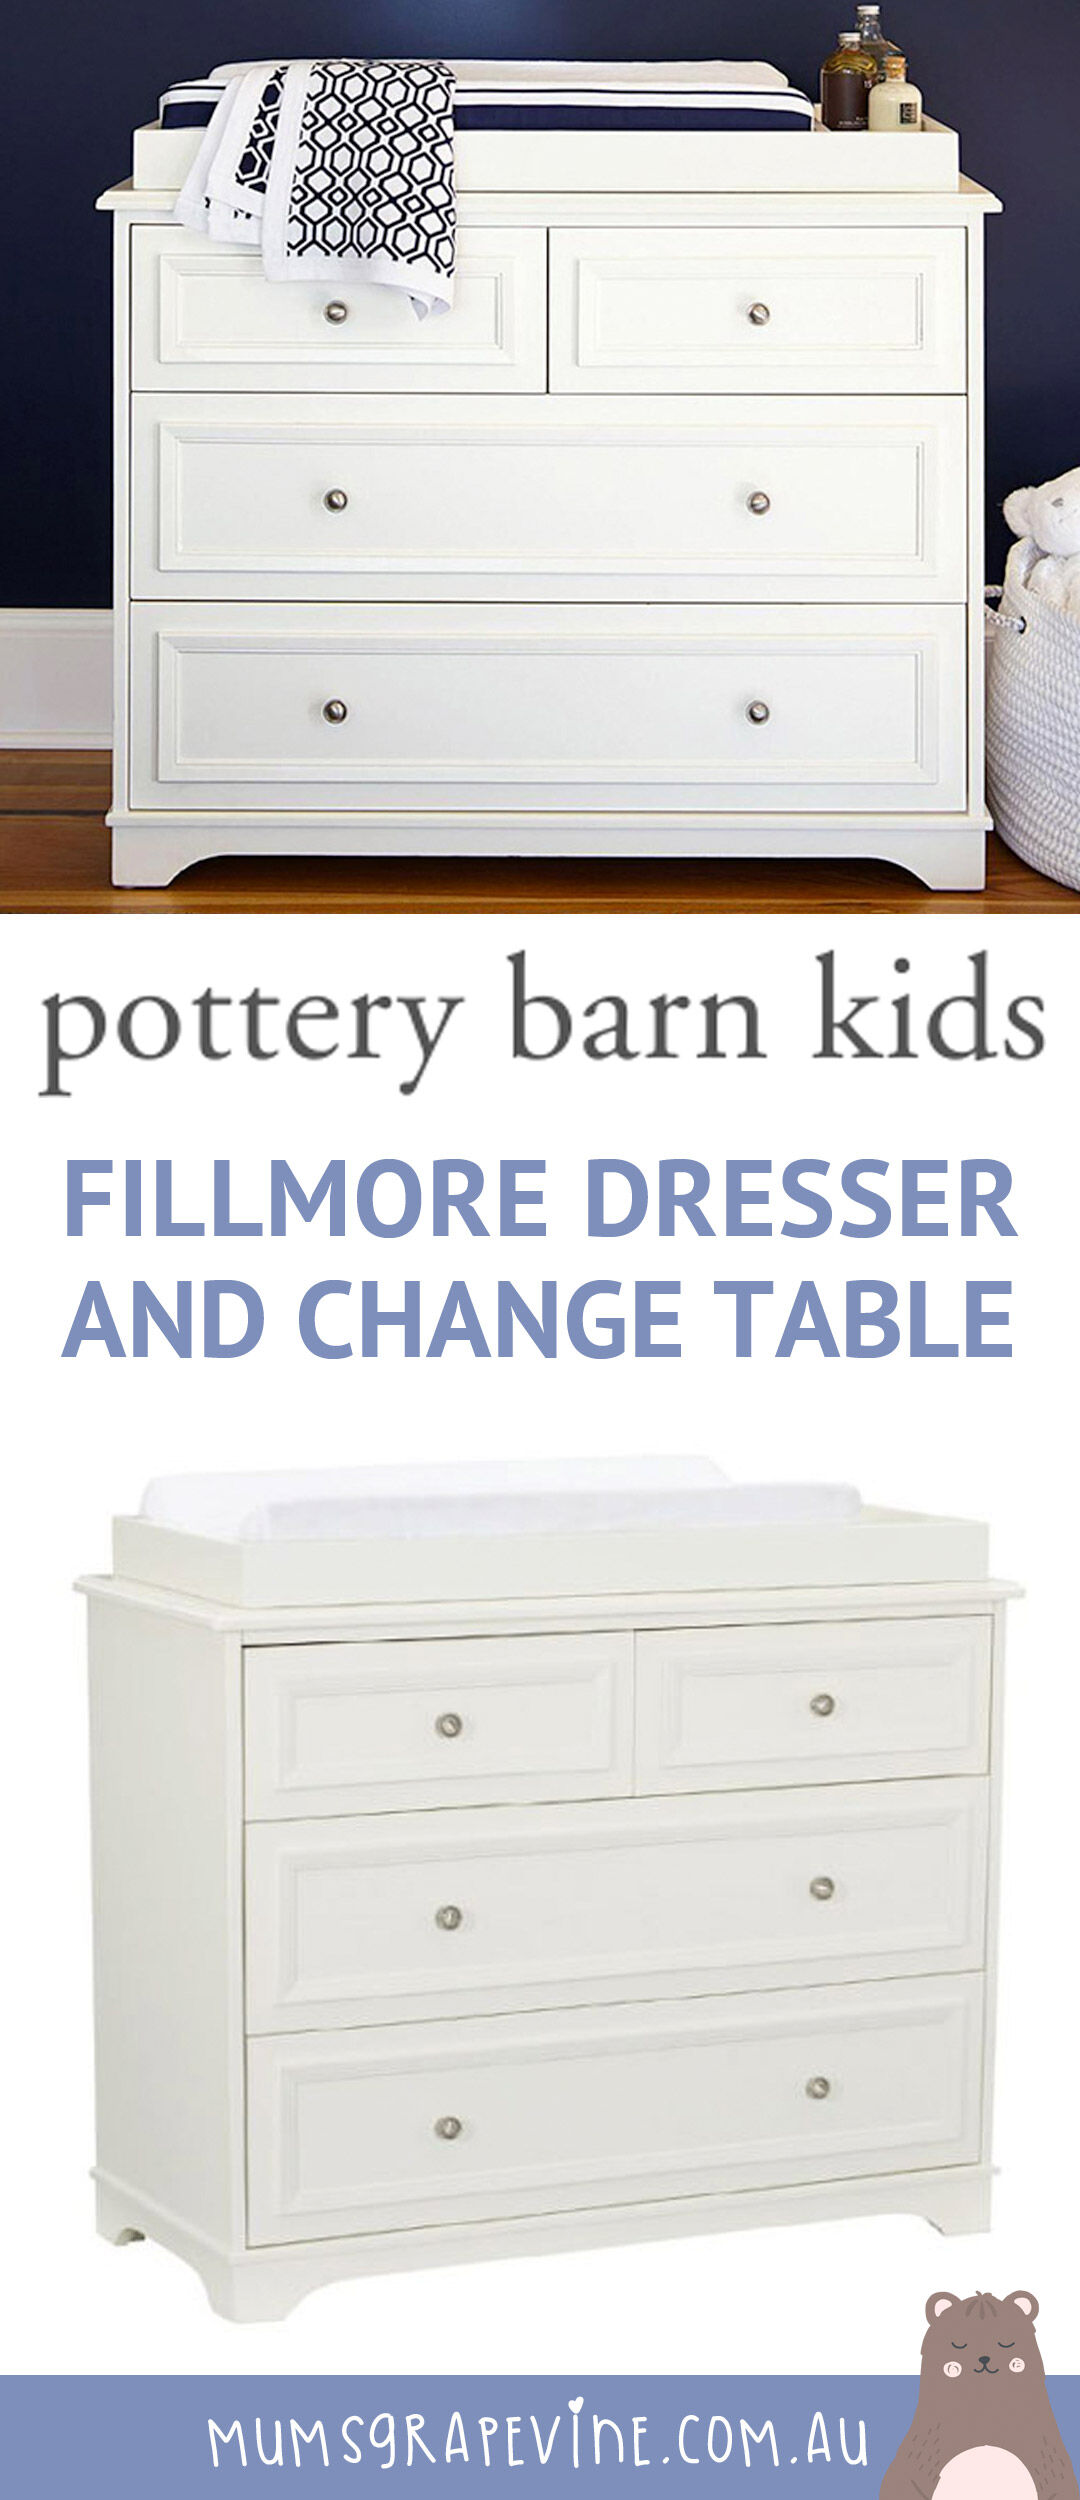 Pottery Barn Kids Fillmore dresser and change table